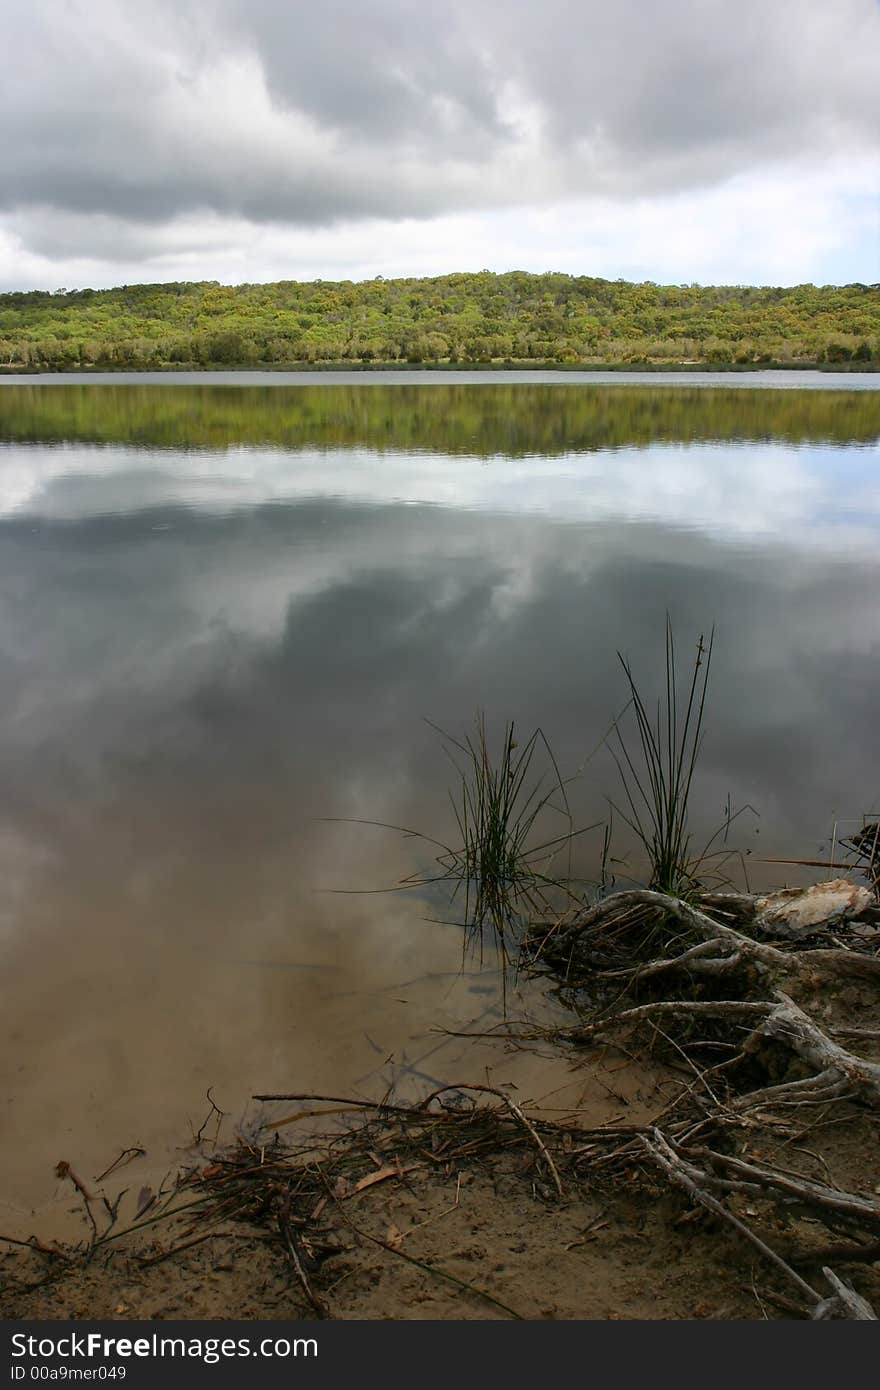 View of a like with wet roots in the forground and hill reflecting in the water in the background. View of a like with wet roots in the forground and hill reflecting in the water in the background